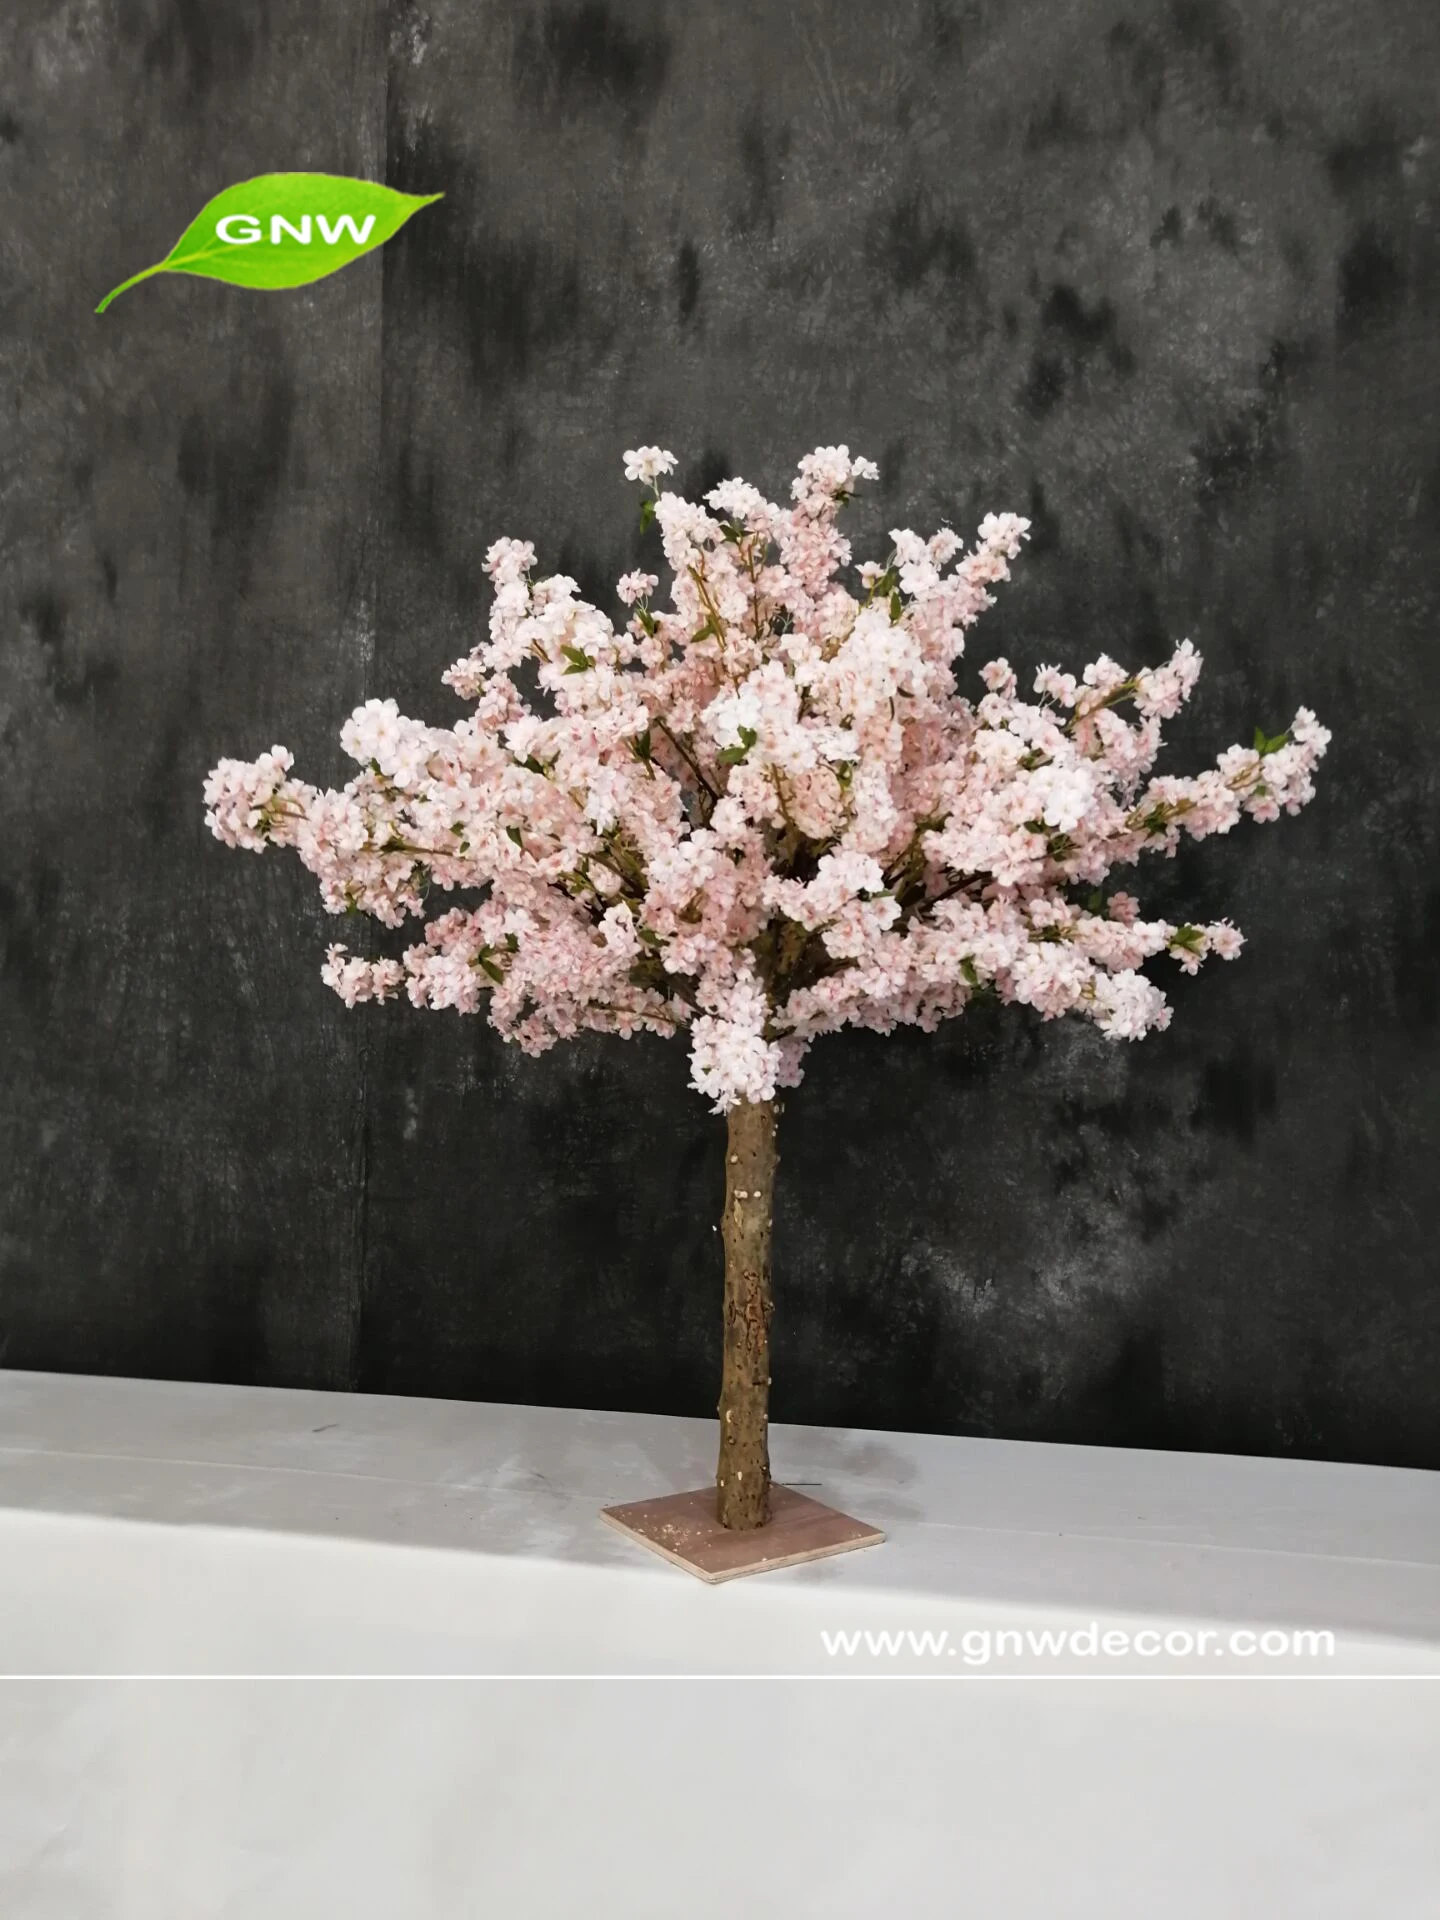 GNW wedding supplier artificial colorful with greenery cherry blossom tree for wedding table centerpiece